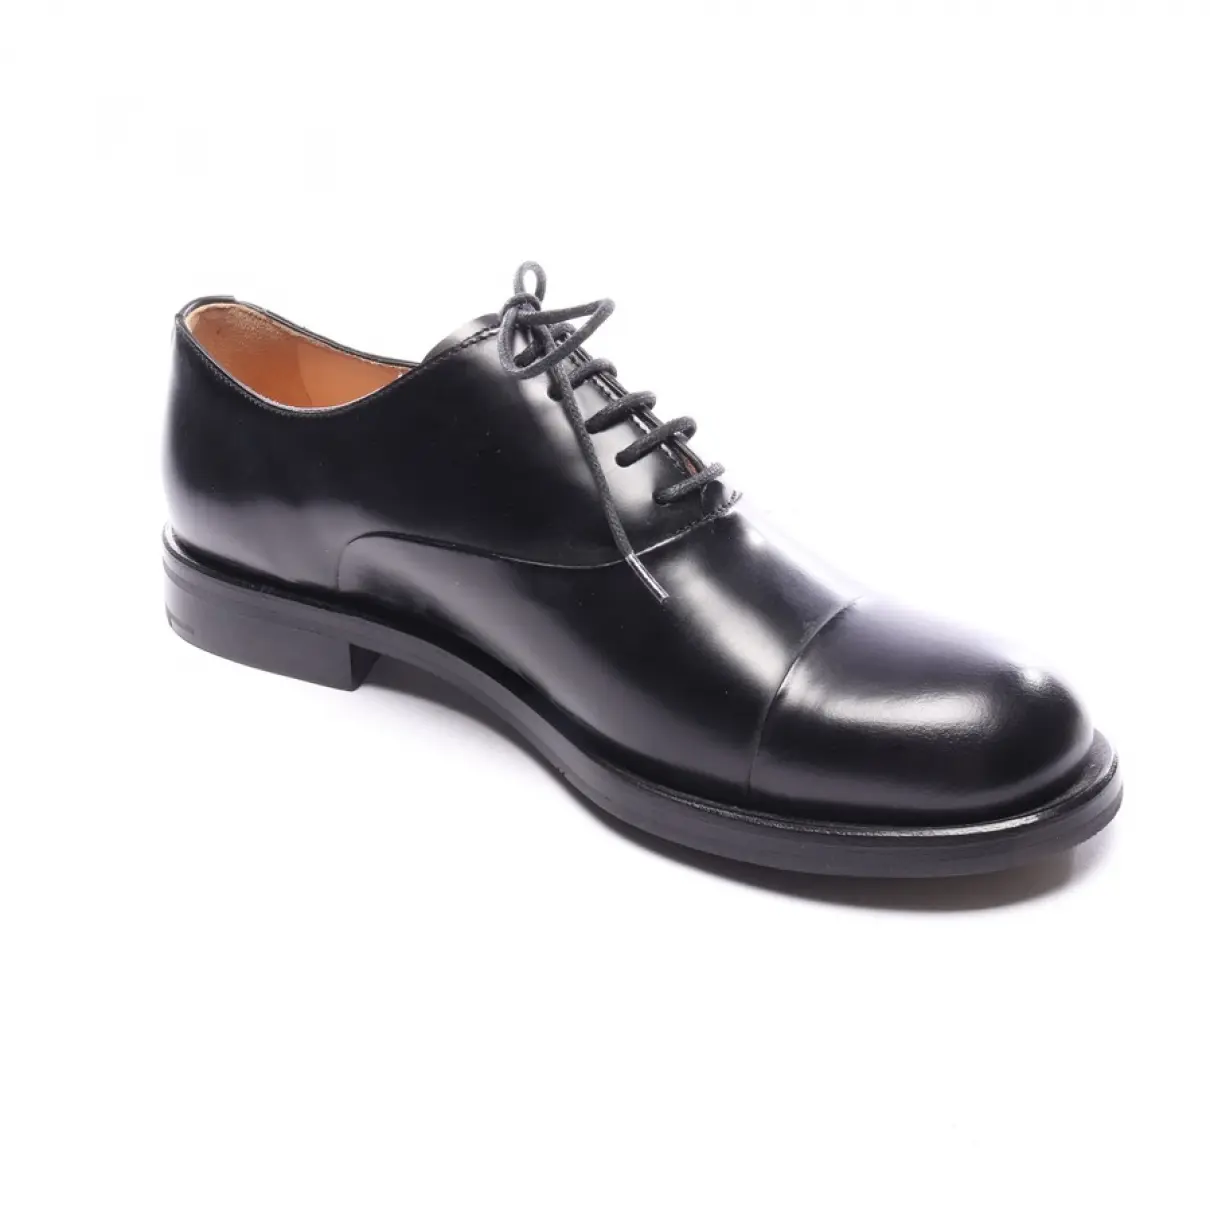 Buy Church's Leather boots online